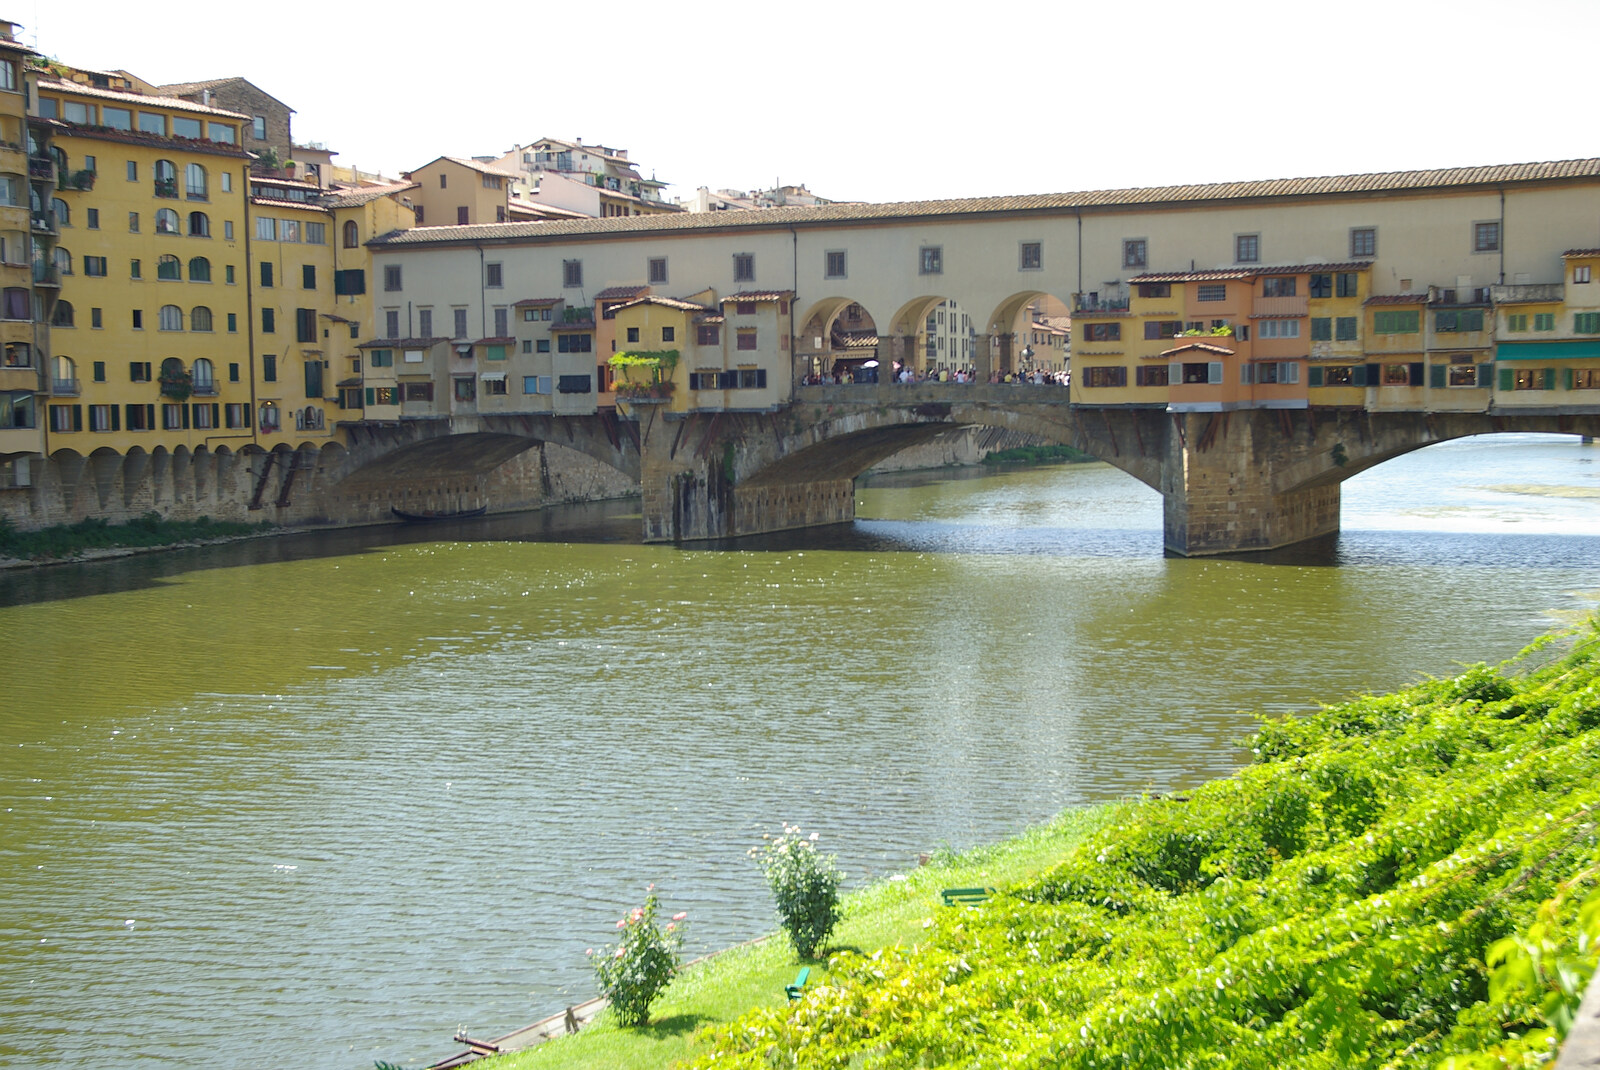 The Ponte Vecchio from A Day Trip to Firenze, Tuscany, Italy - 24th July 2008